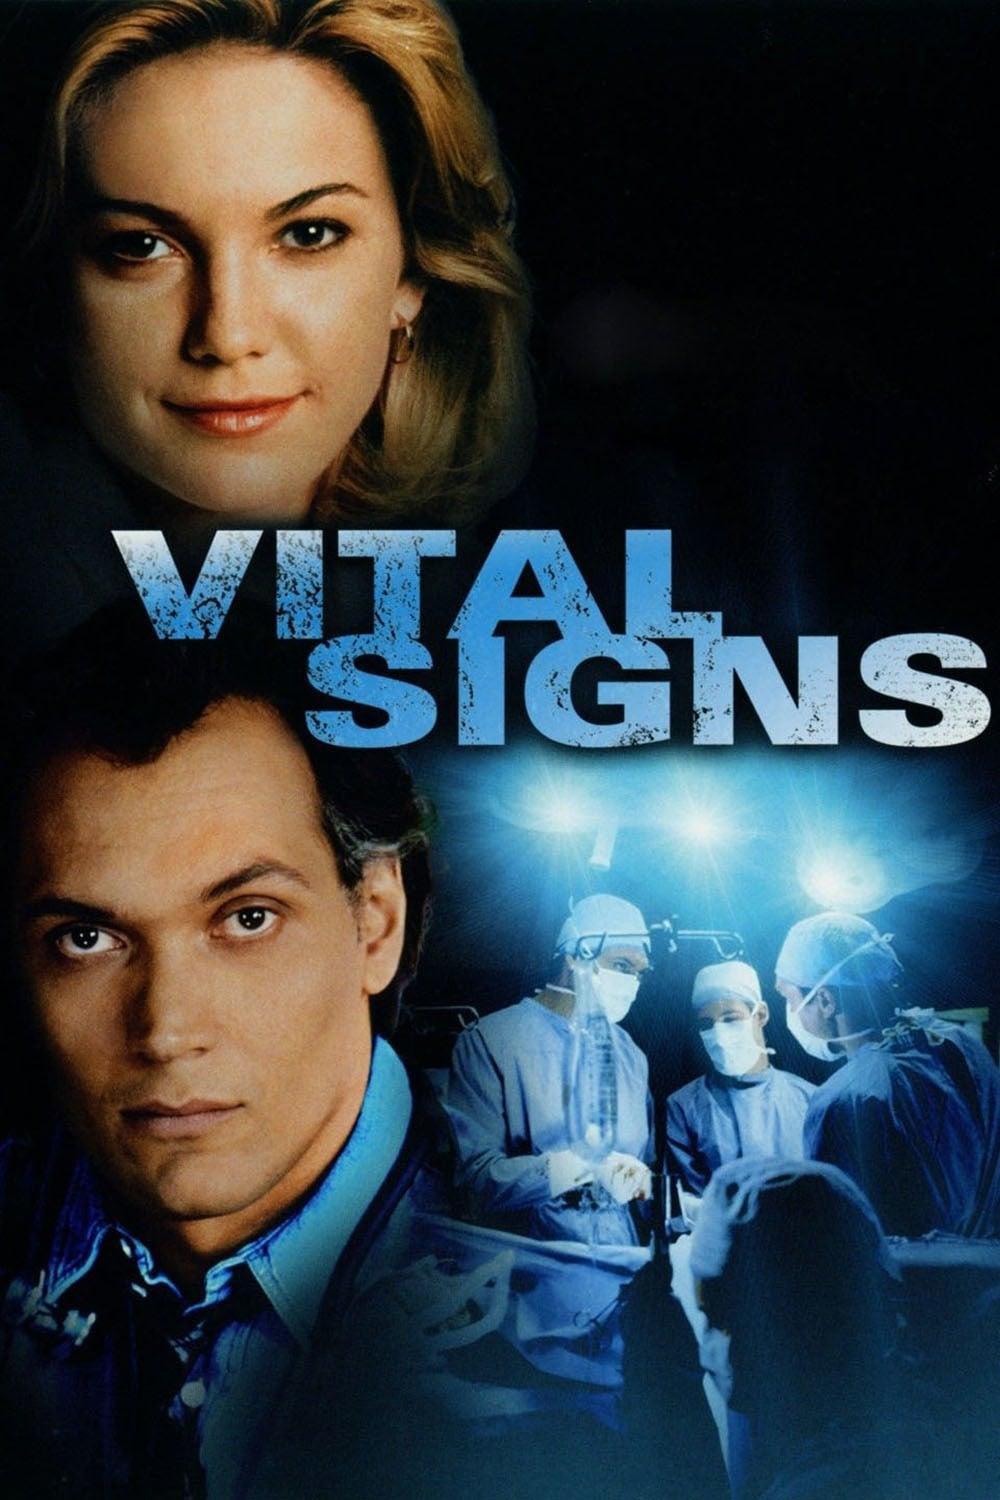 Vital Signs poster